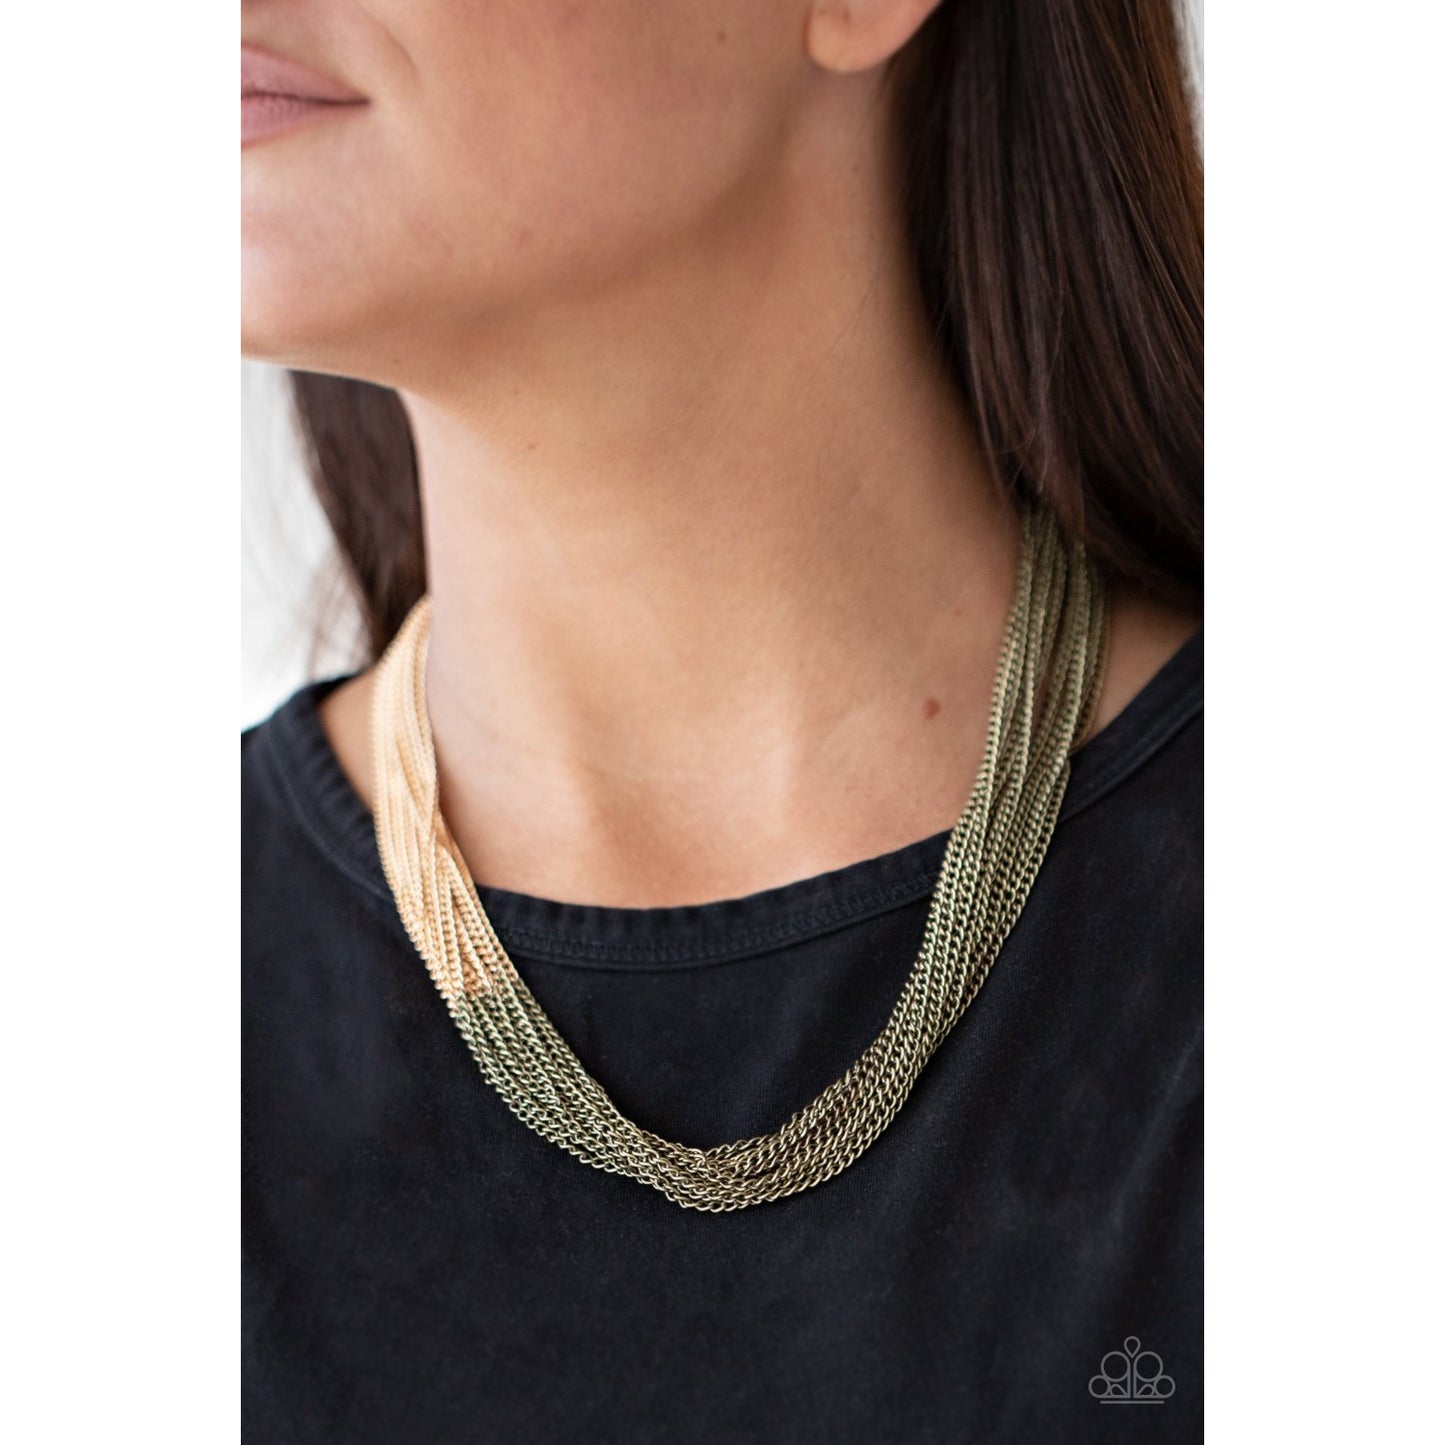 Metallic Merger - Brass and Gold Necklace - Paparazzi Accessories - GlaMarous Titi Jewels